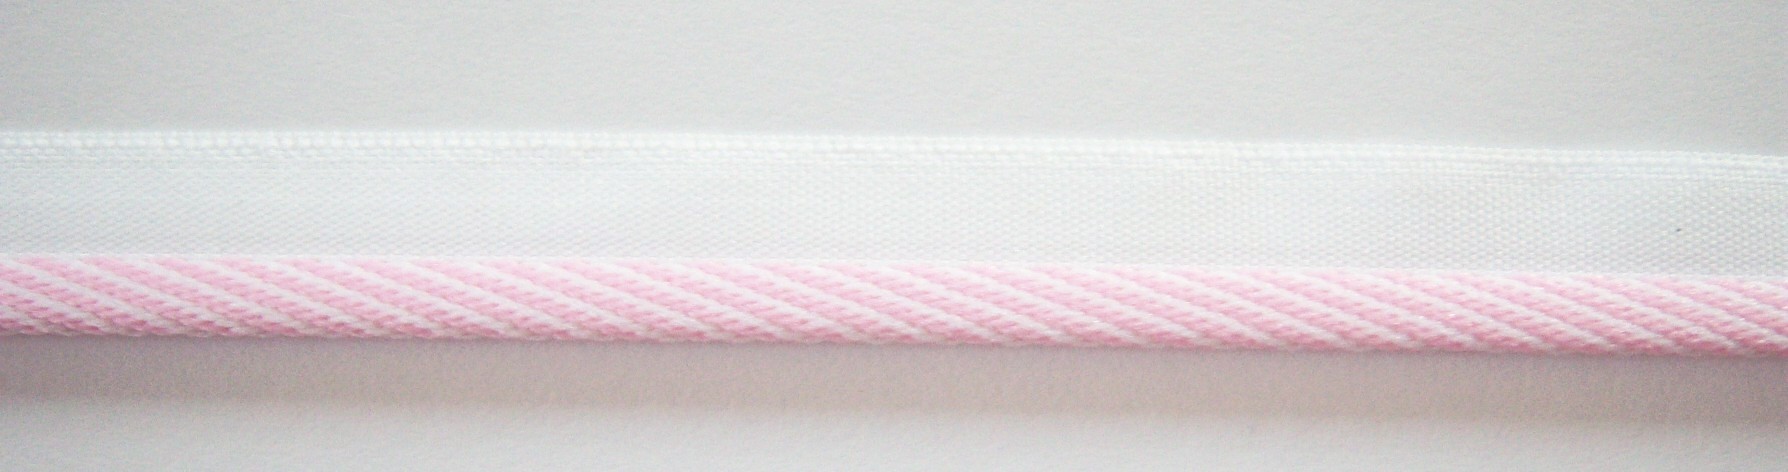 White/Pink 3/16" Striped Piping